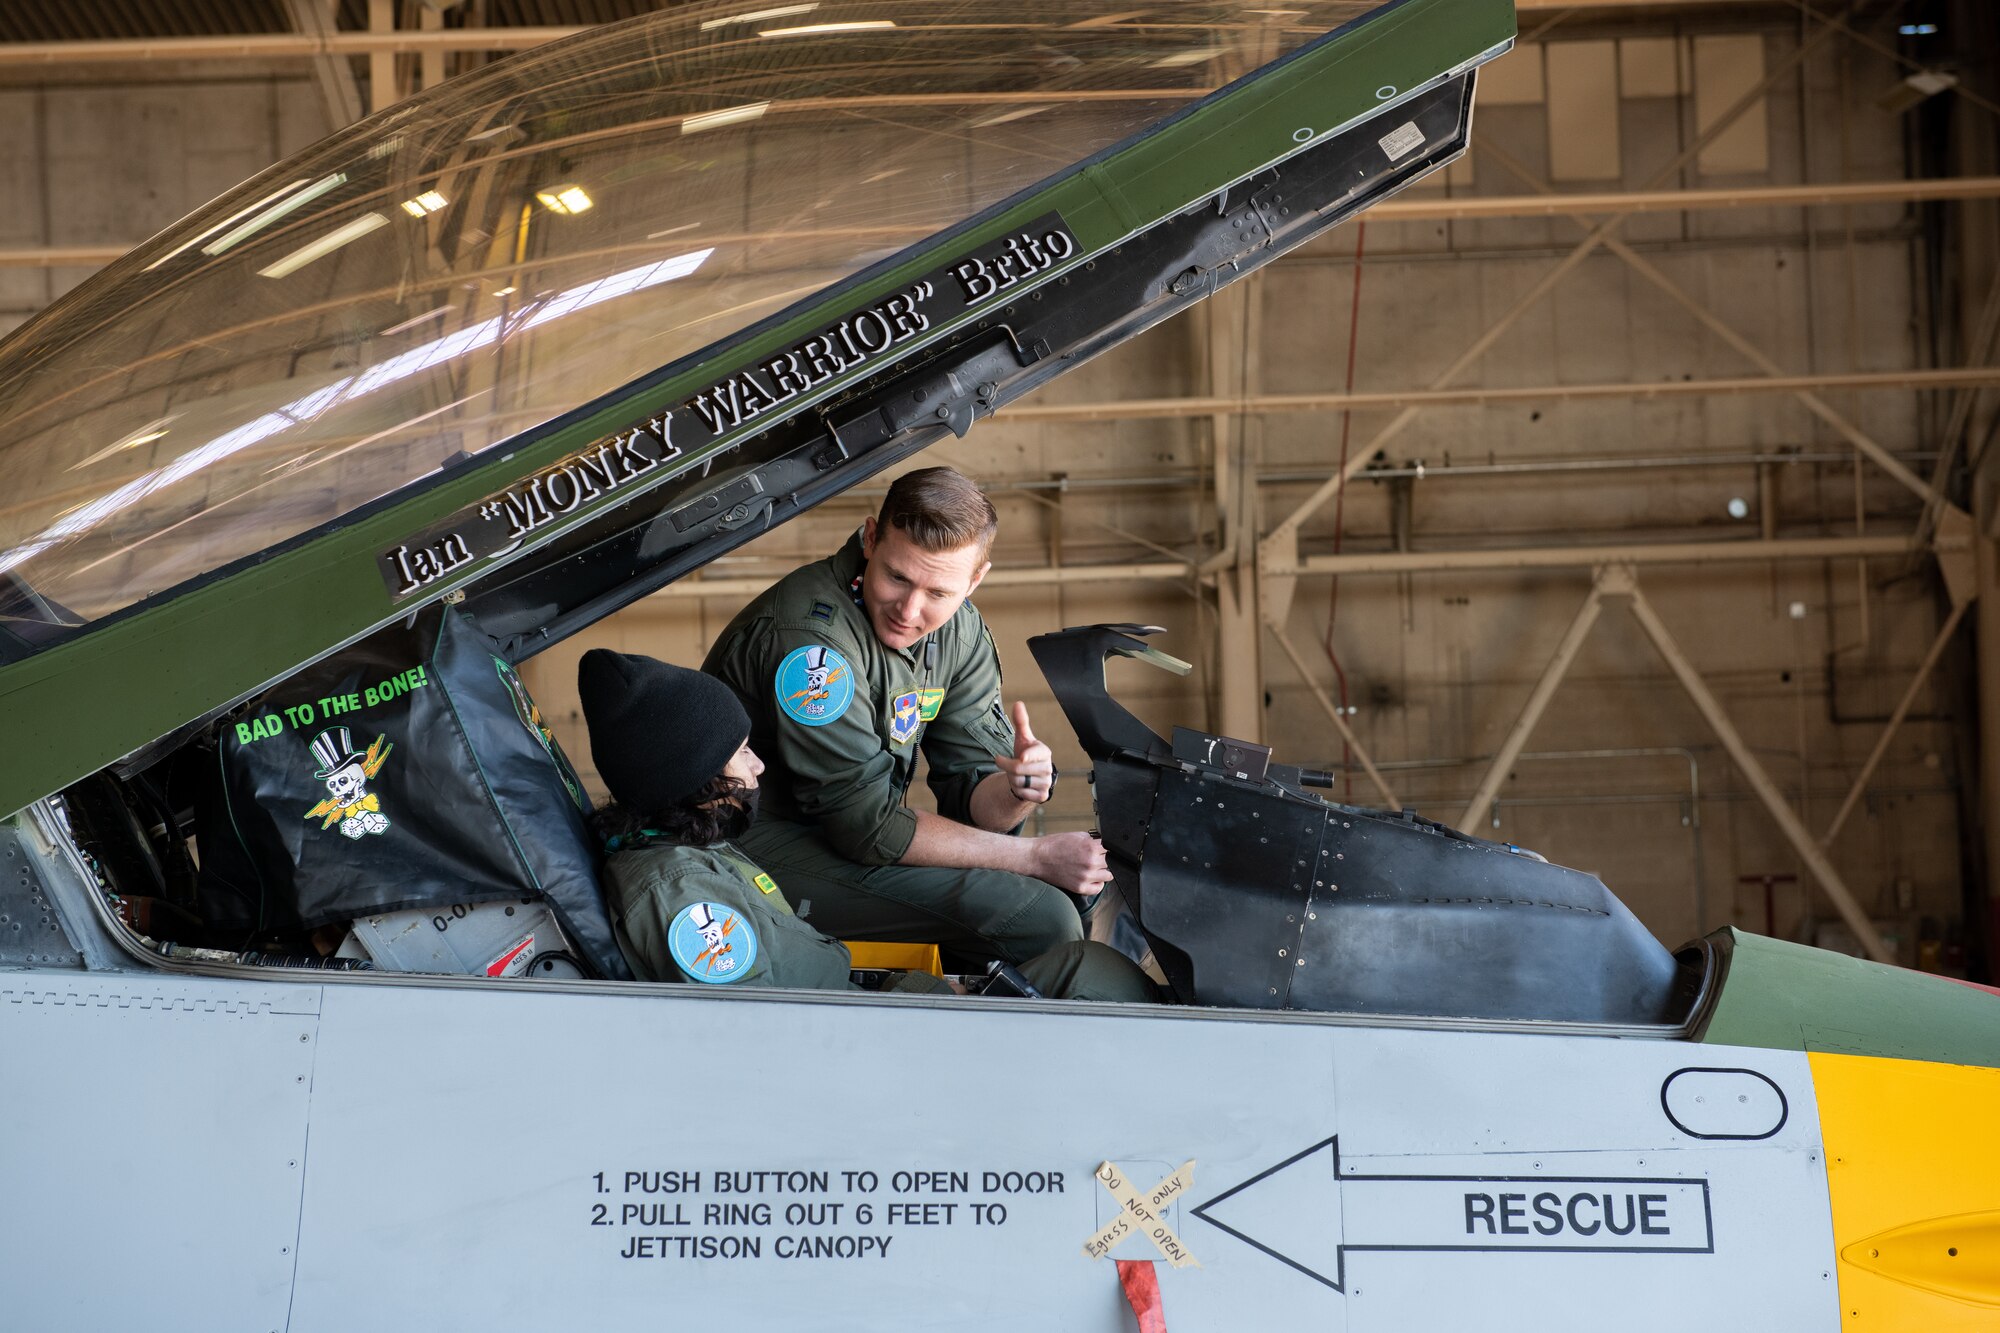 Ian “Monky Warrior” Brito, Pilot for a Day participant, sits in an F-16 Fighting Falcon Feb. 25, 2022, at Luke Air Force Base, Arizona.